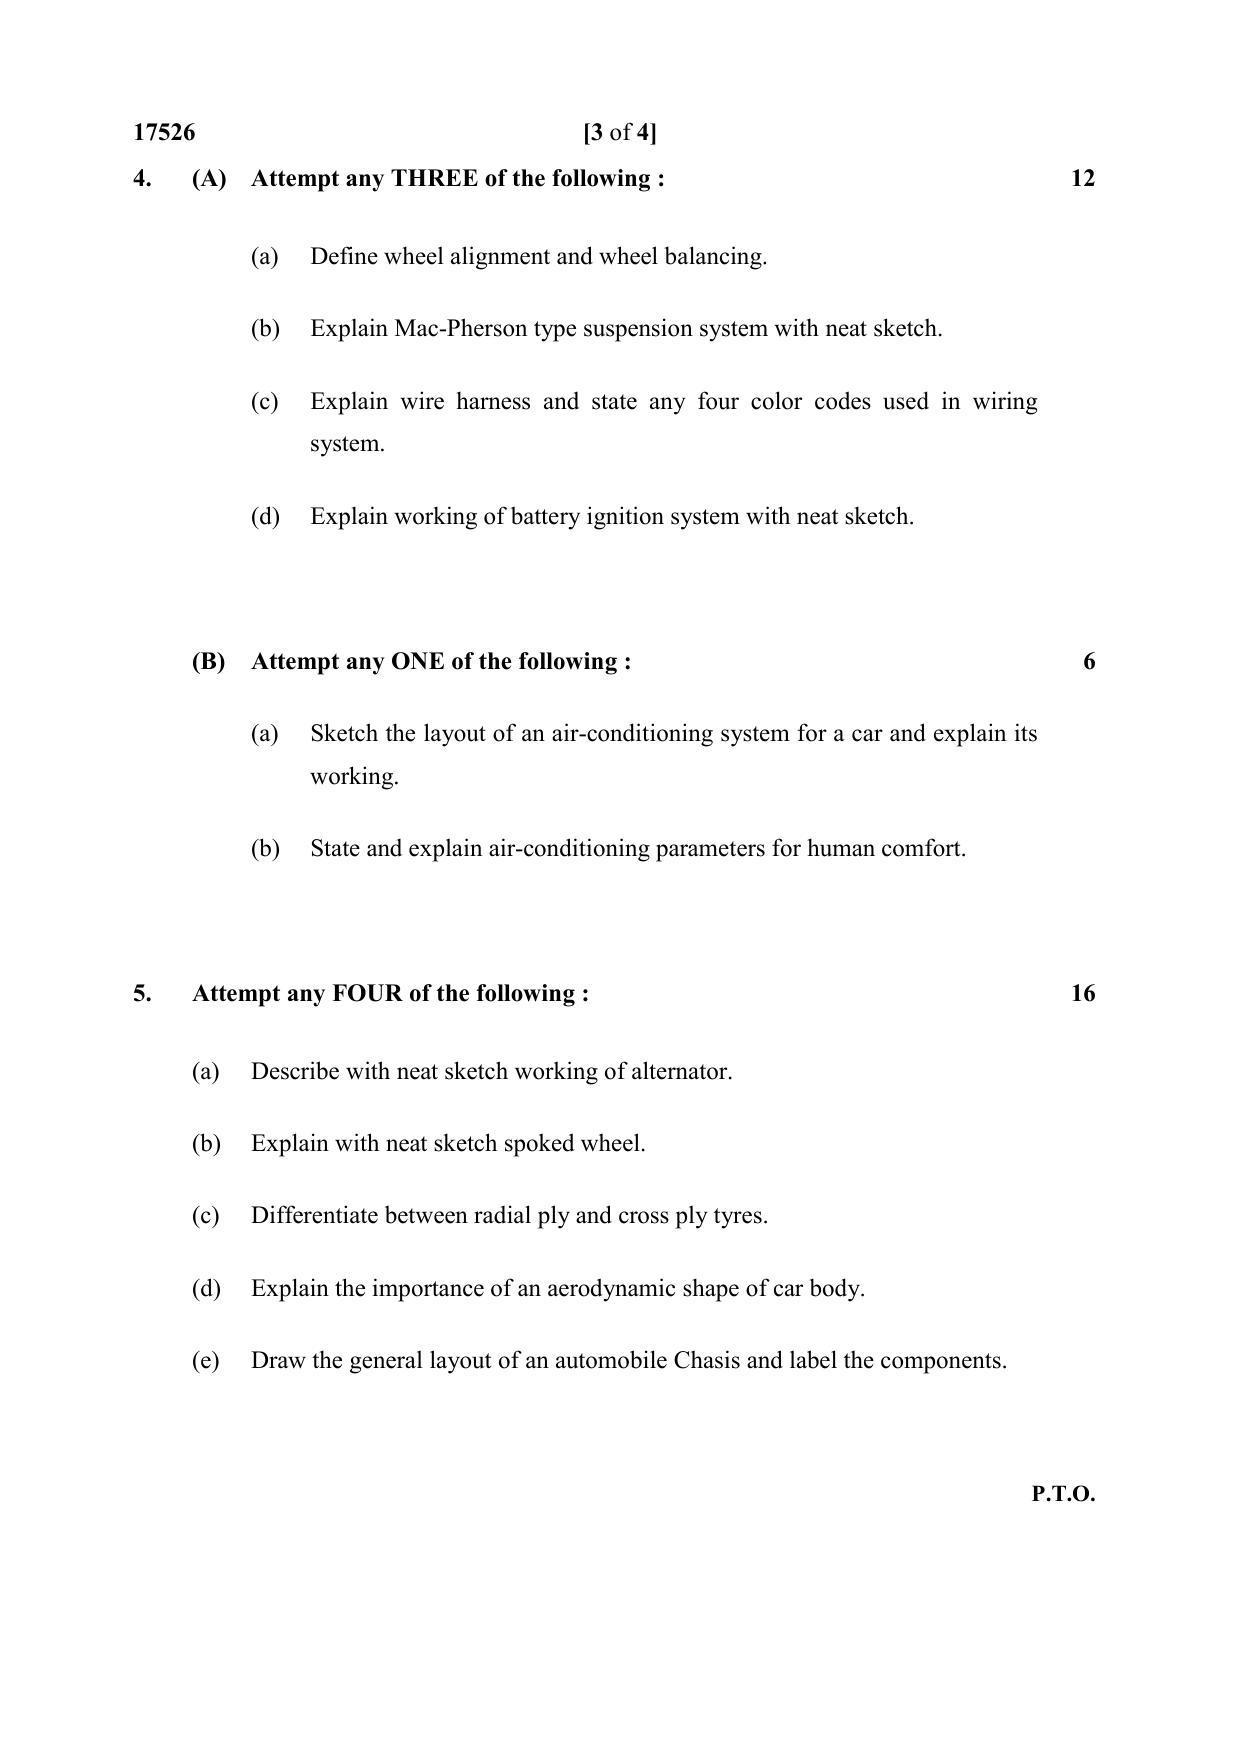 MSBTE Winter Question Paper 2019 - Advanced Manufacturing Processes - Page 3